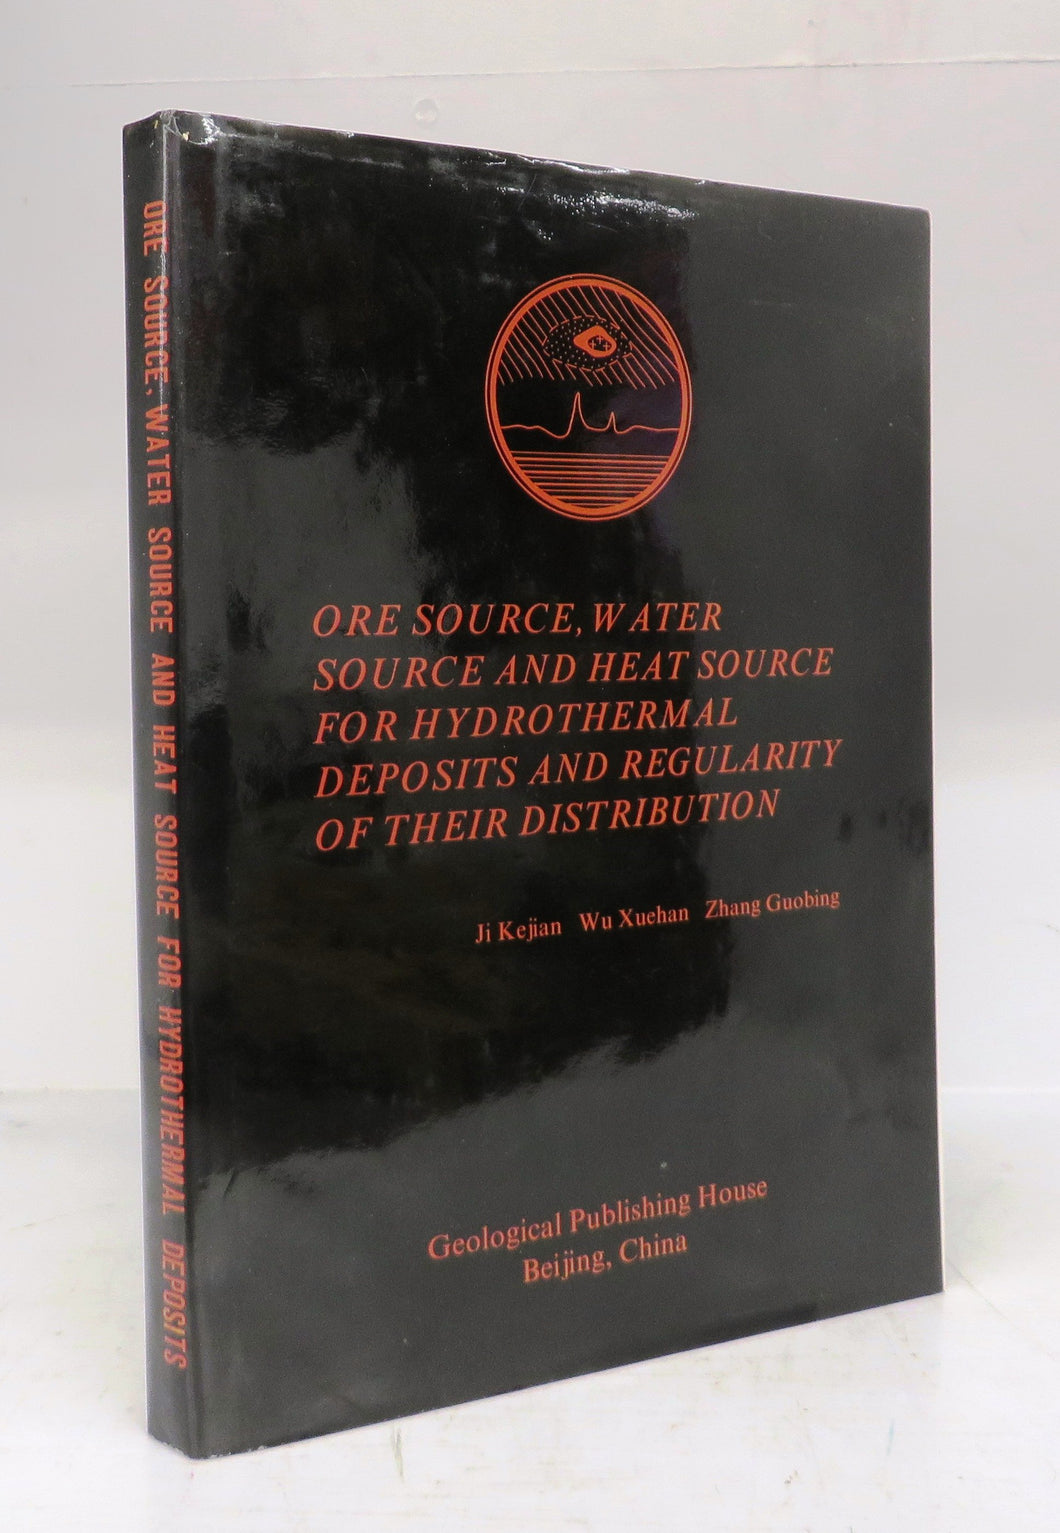 Ore Source, Water Source and Heat Source for Hydrothermal Deposits and Regularity of Their Distribution